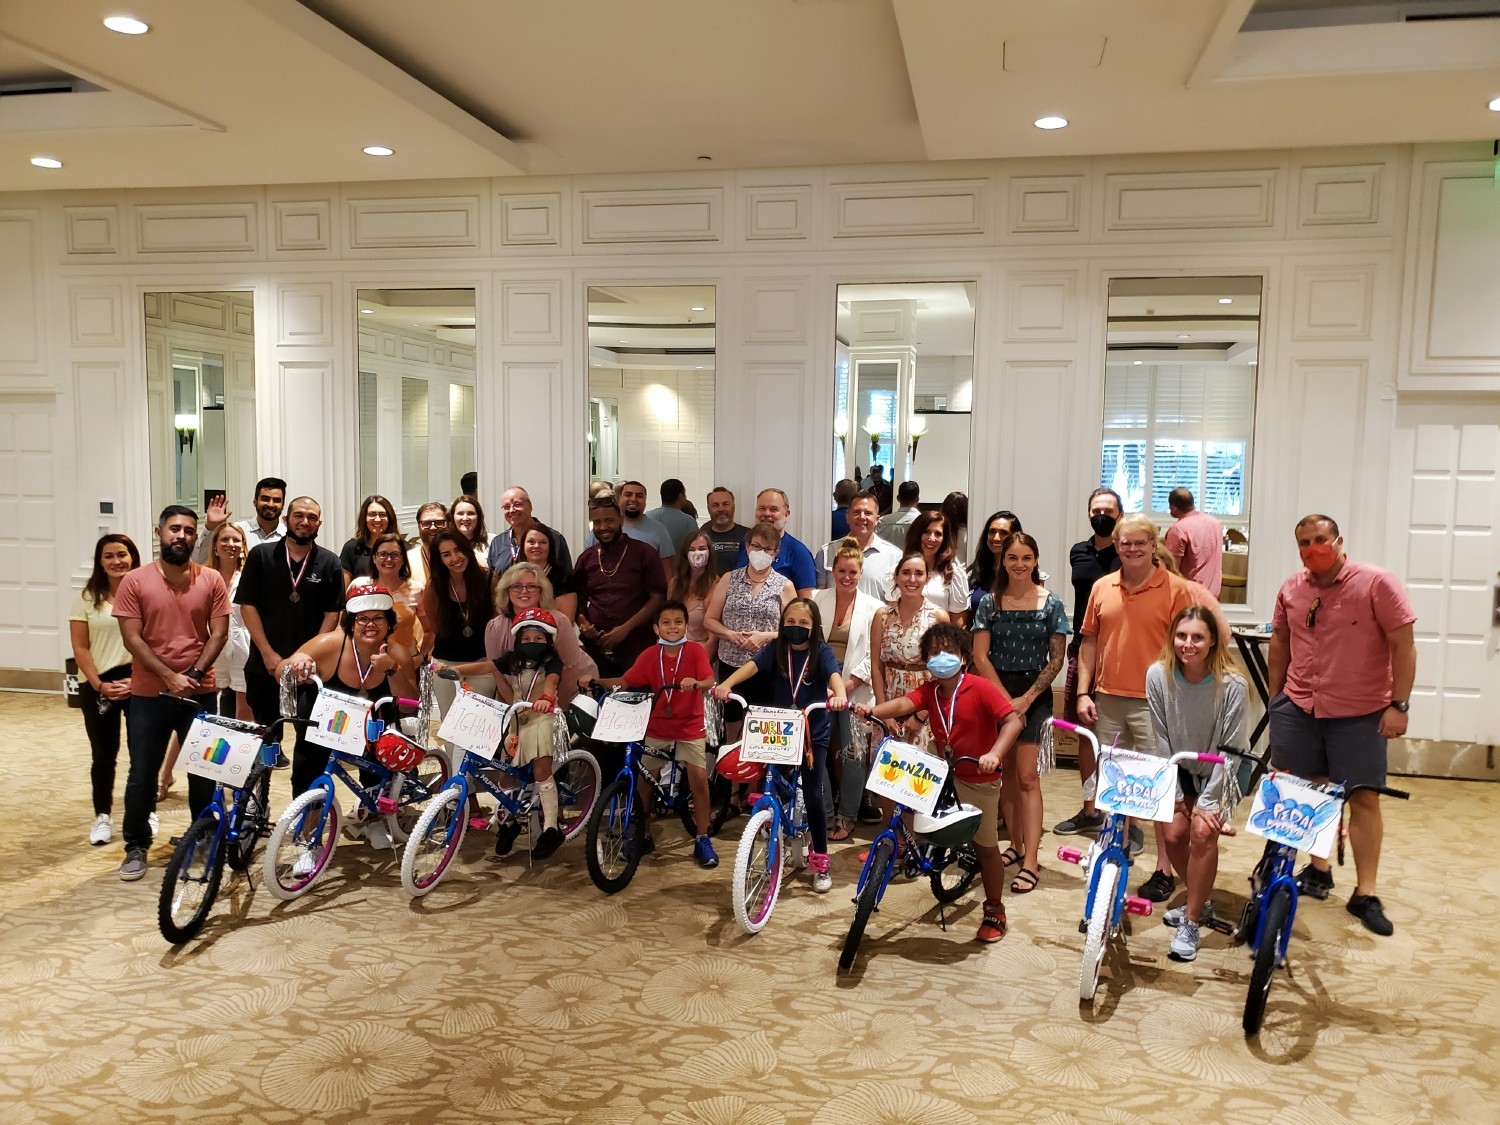 The bikes we made for the Miami-Dade Boys and Girls Club